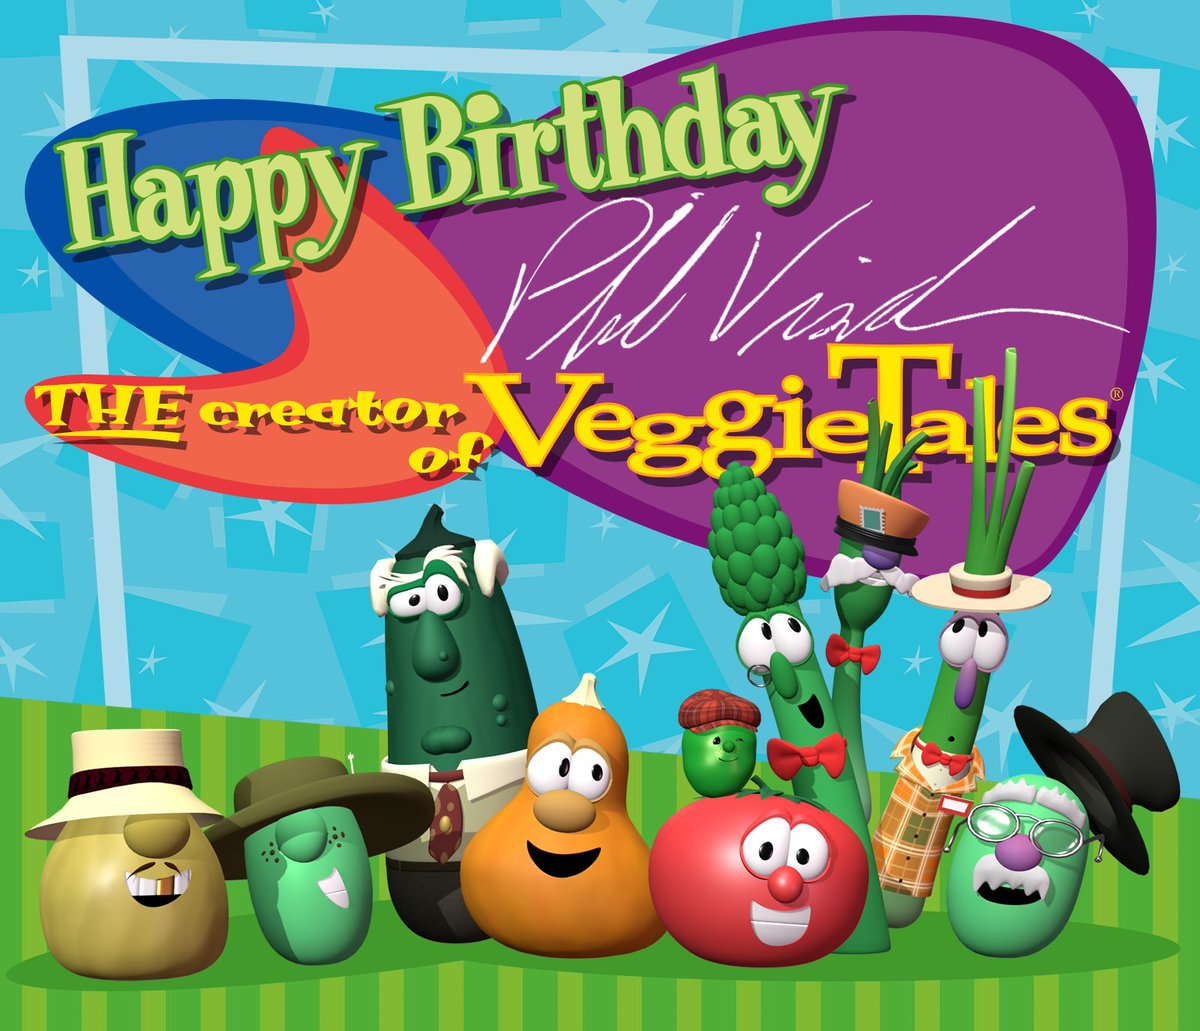 This goes out to THE creator of @VeggieTales, the one and only @philvischer! 😄🥳🎉🎊